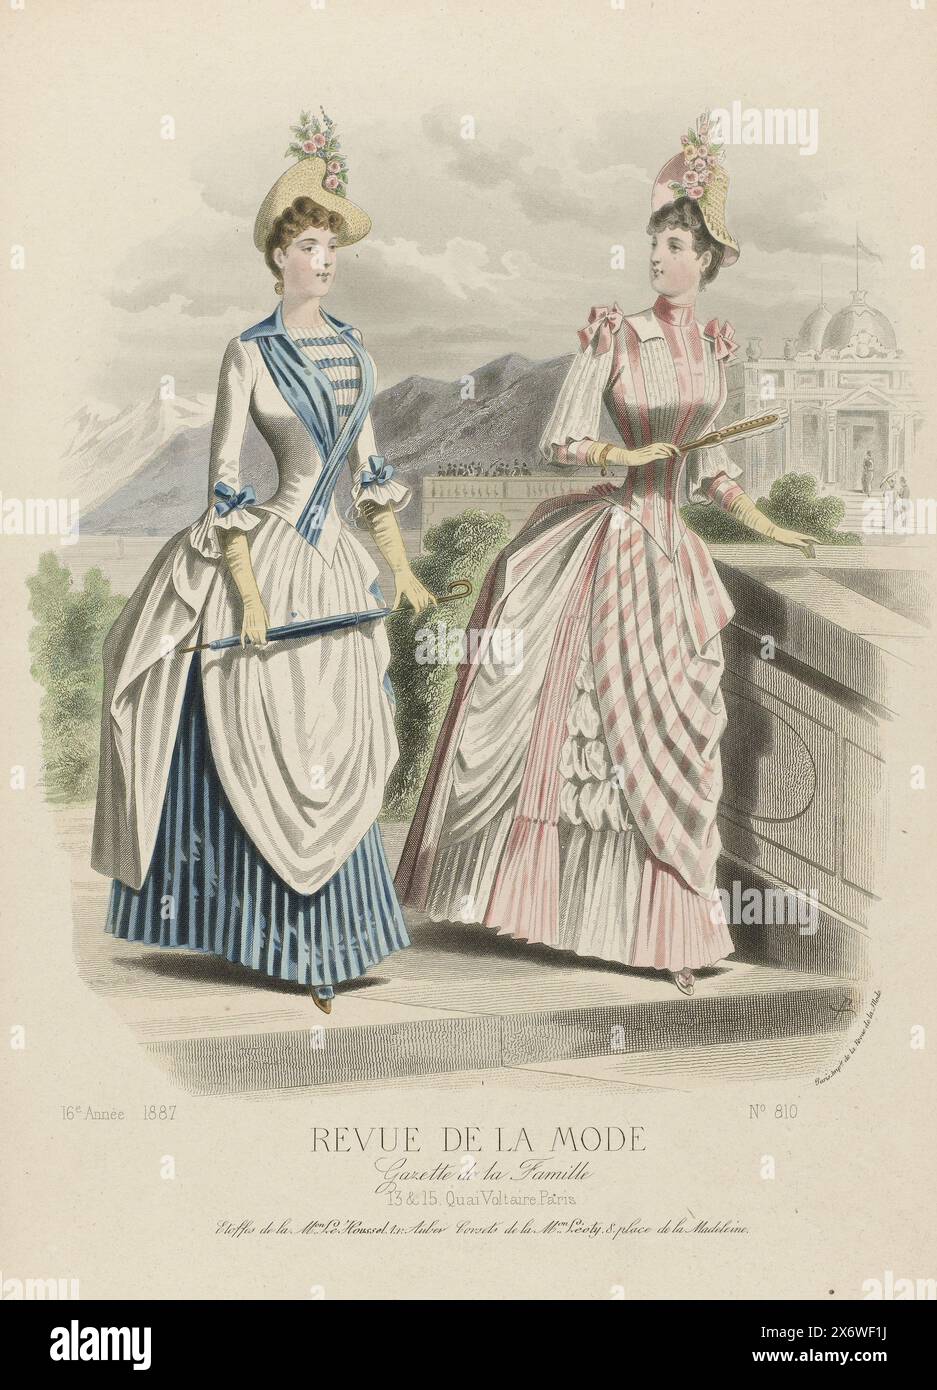 Revue de la Mode, Gazette de la Famille, dimanche 10 July 1887, 16e Année, No. 810: Etoffes de la M.on Le Houssel (...), Two women near a balustrade, in the background a mountain landscape and some figures near an estate. Left: 'toilette' of blue faille, white faille and white woolen muslin. Sleeves decorated with a small flounce of gathered muslin with a small bow of blue silk. Right: 'toilette' of white-pink Pékin silk and light pink silk and muslin with polka dot motif. Pink bows on the shoulders. Below the image a line of advertising text for various products. Print from the fashion Stock Photo